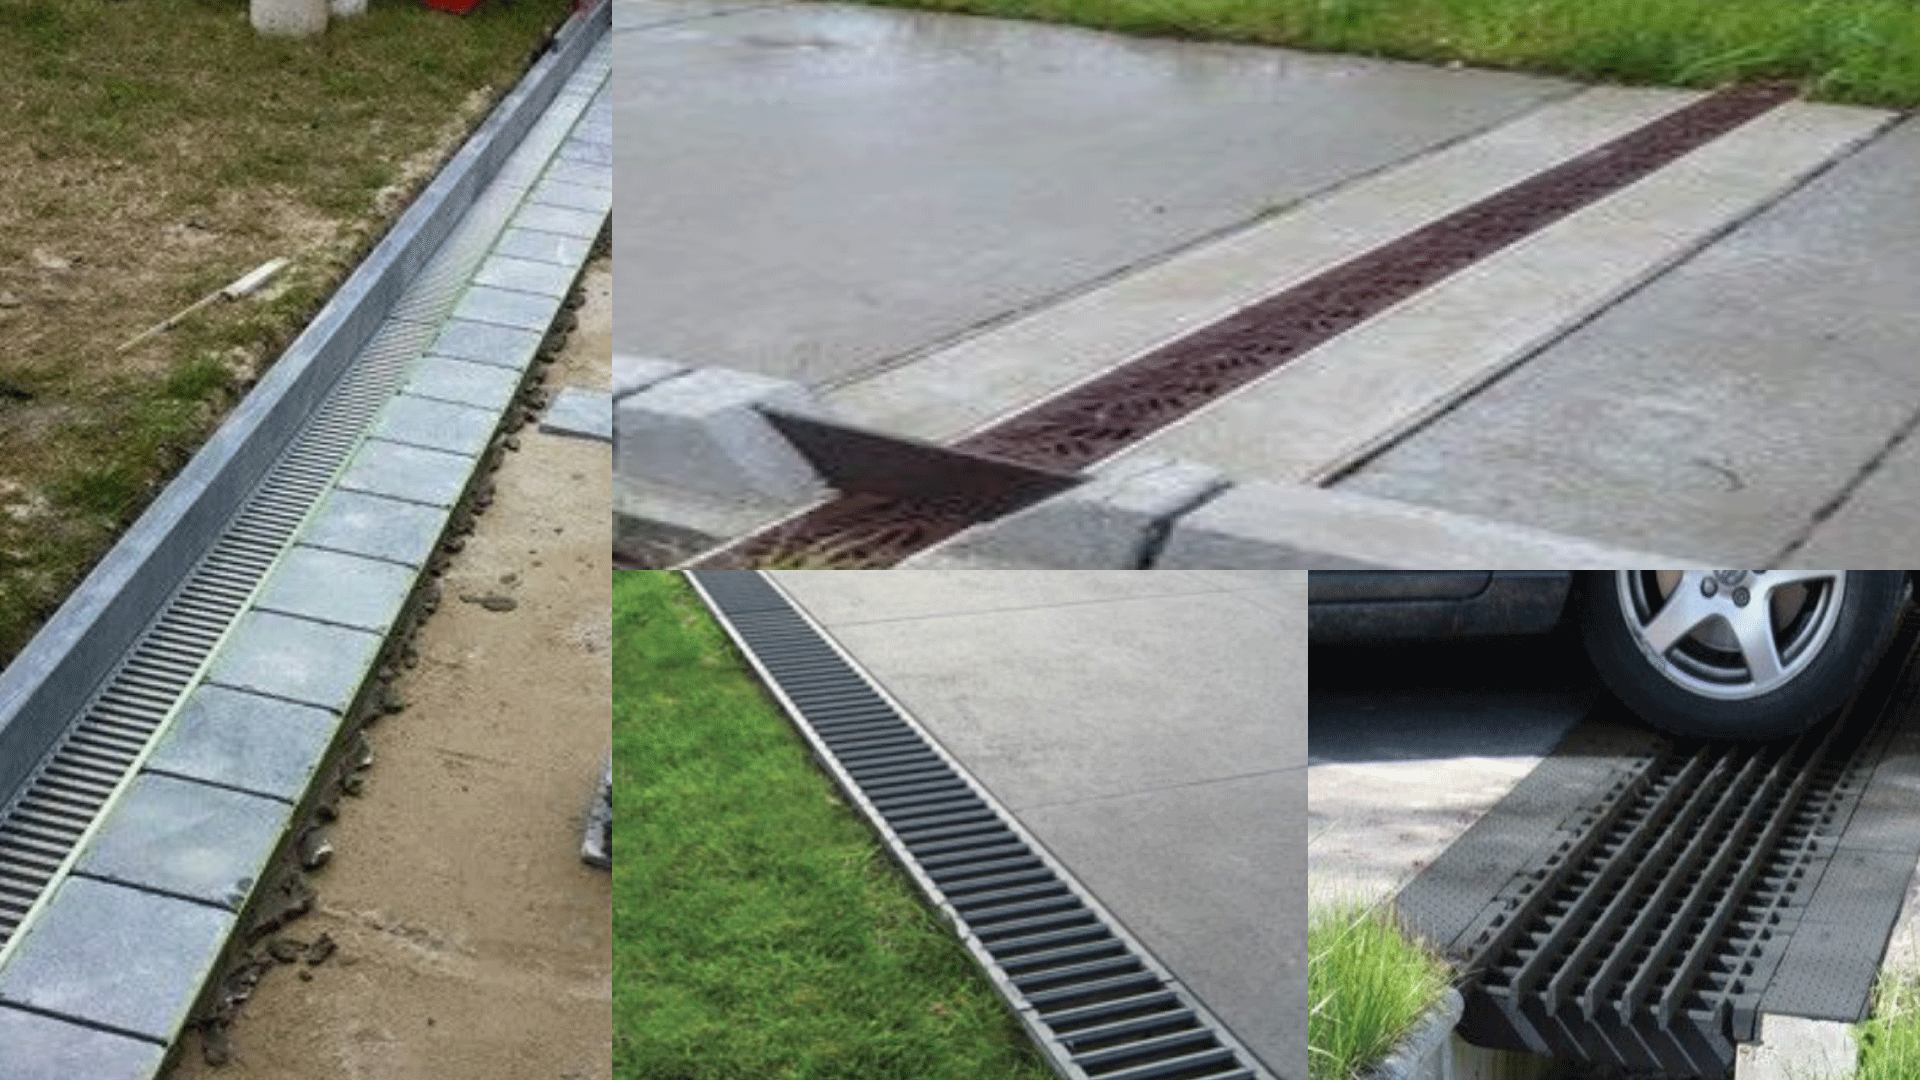 Trench Drain Systems Patio And Driveway Drains Trench Drain Systems ...